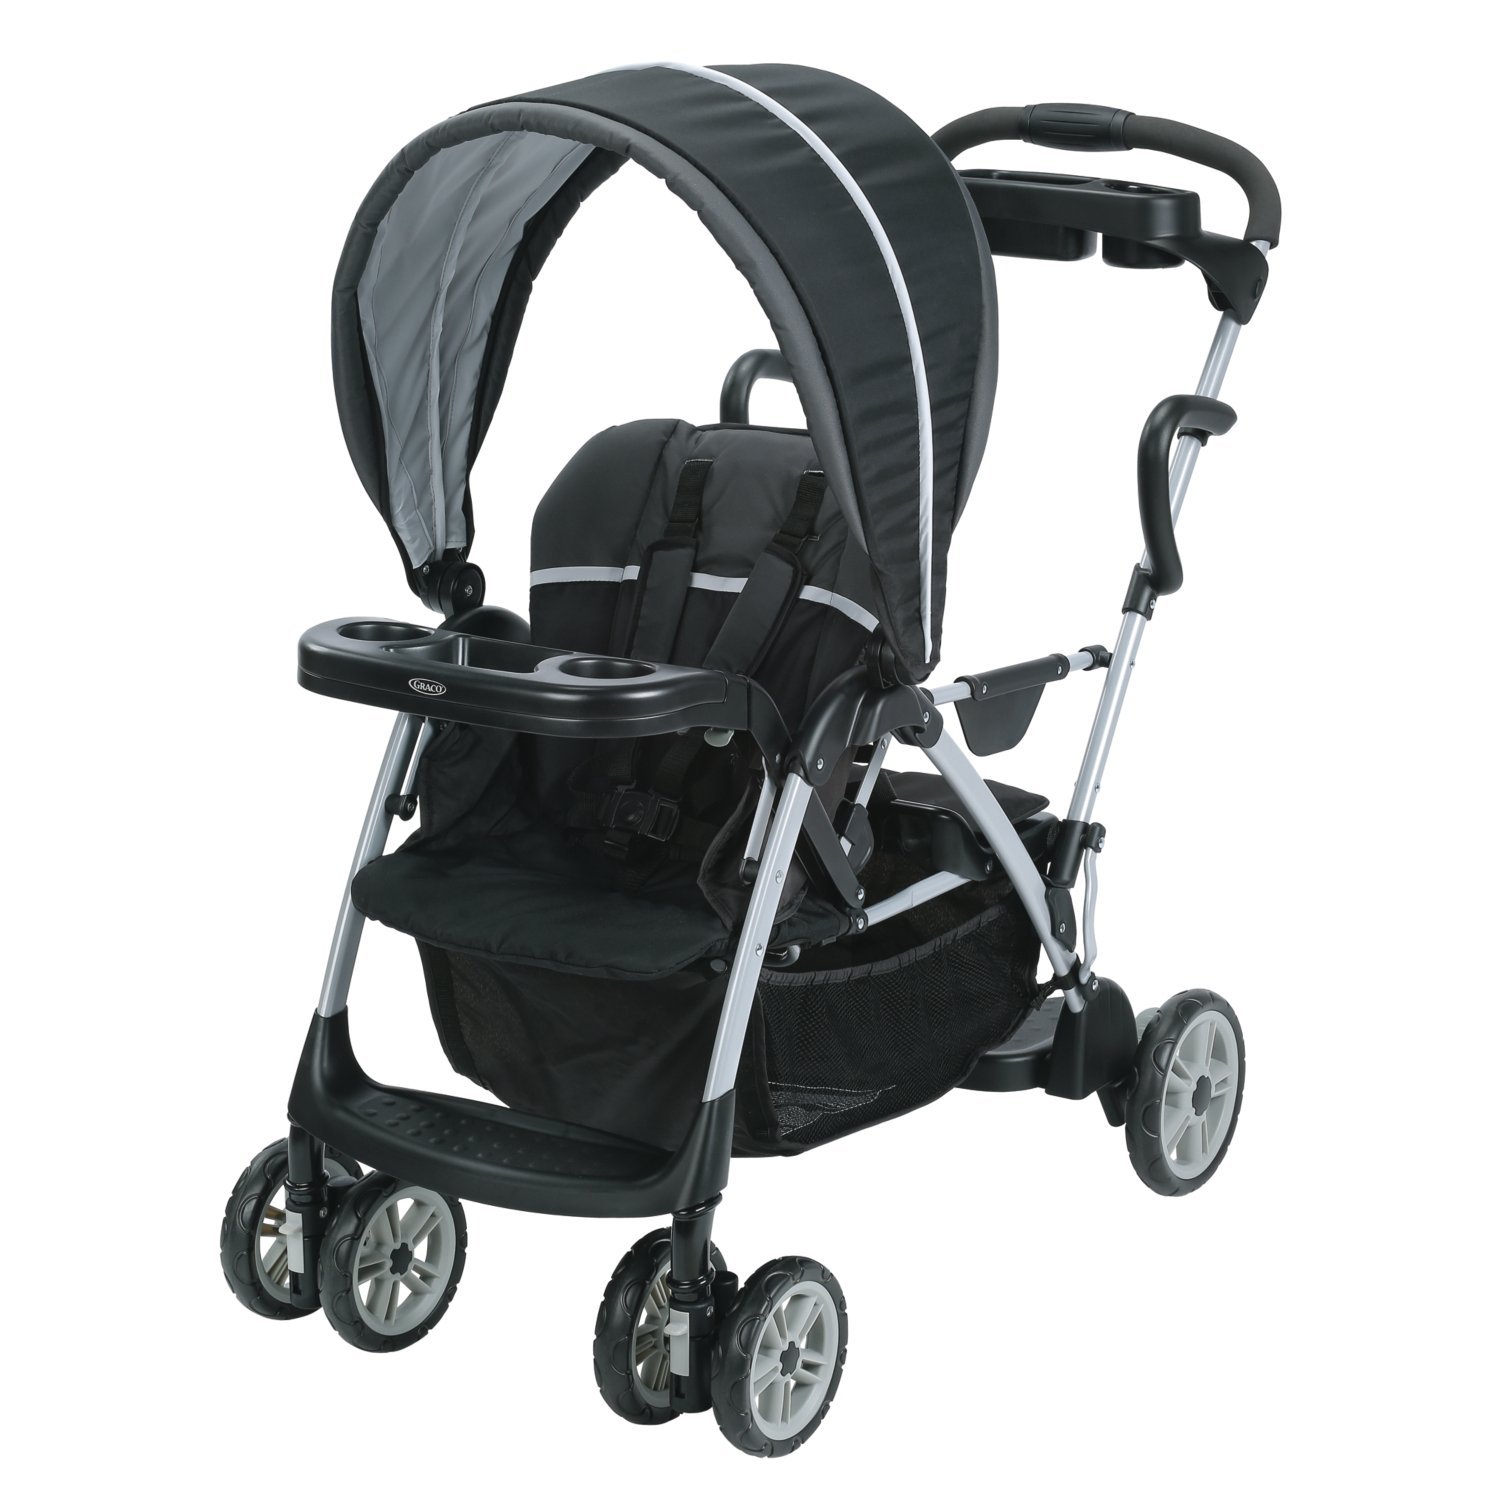 Graco Roomfor2 Click Connect Stand and Ride Stroller – Just $95.00!